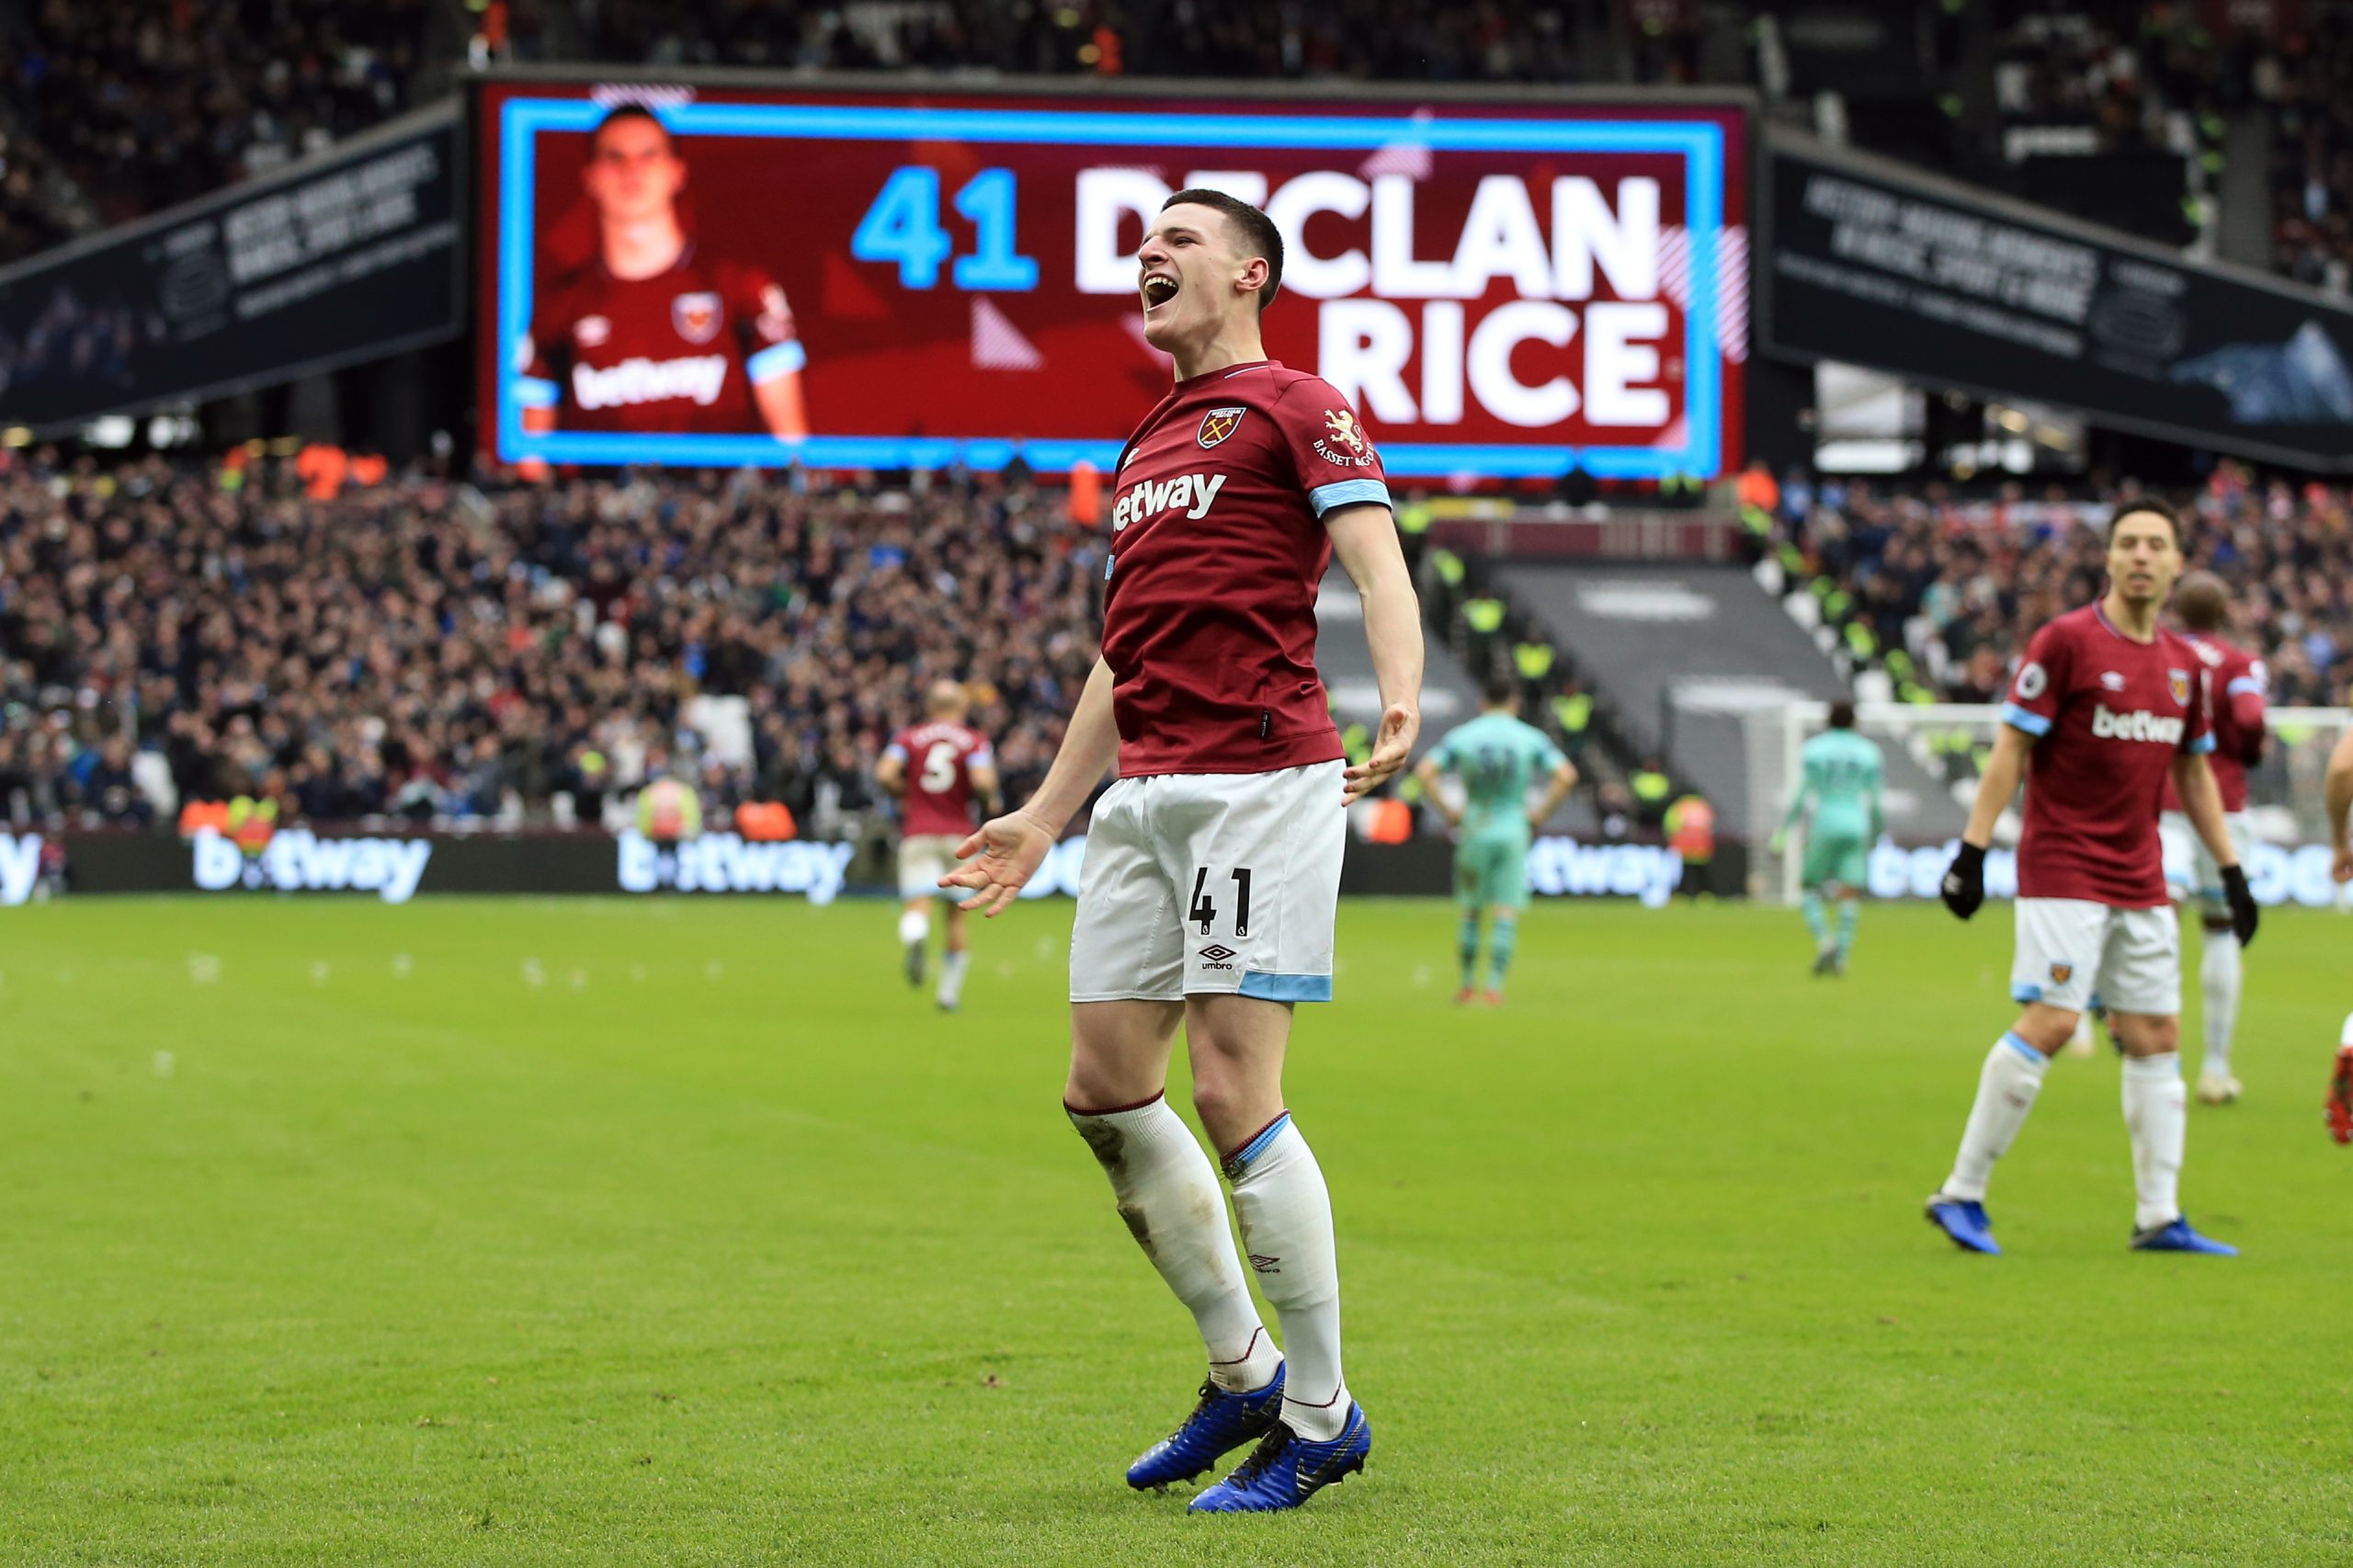 West Ham United slap £80m price tag on Declan Rice who is seen in the picture